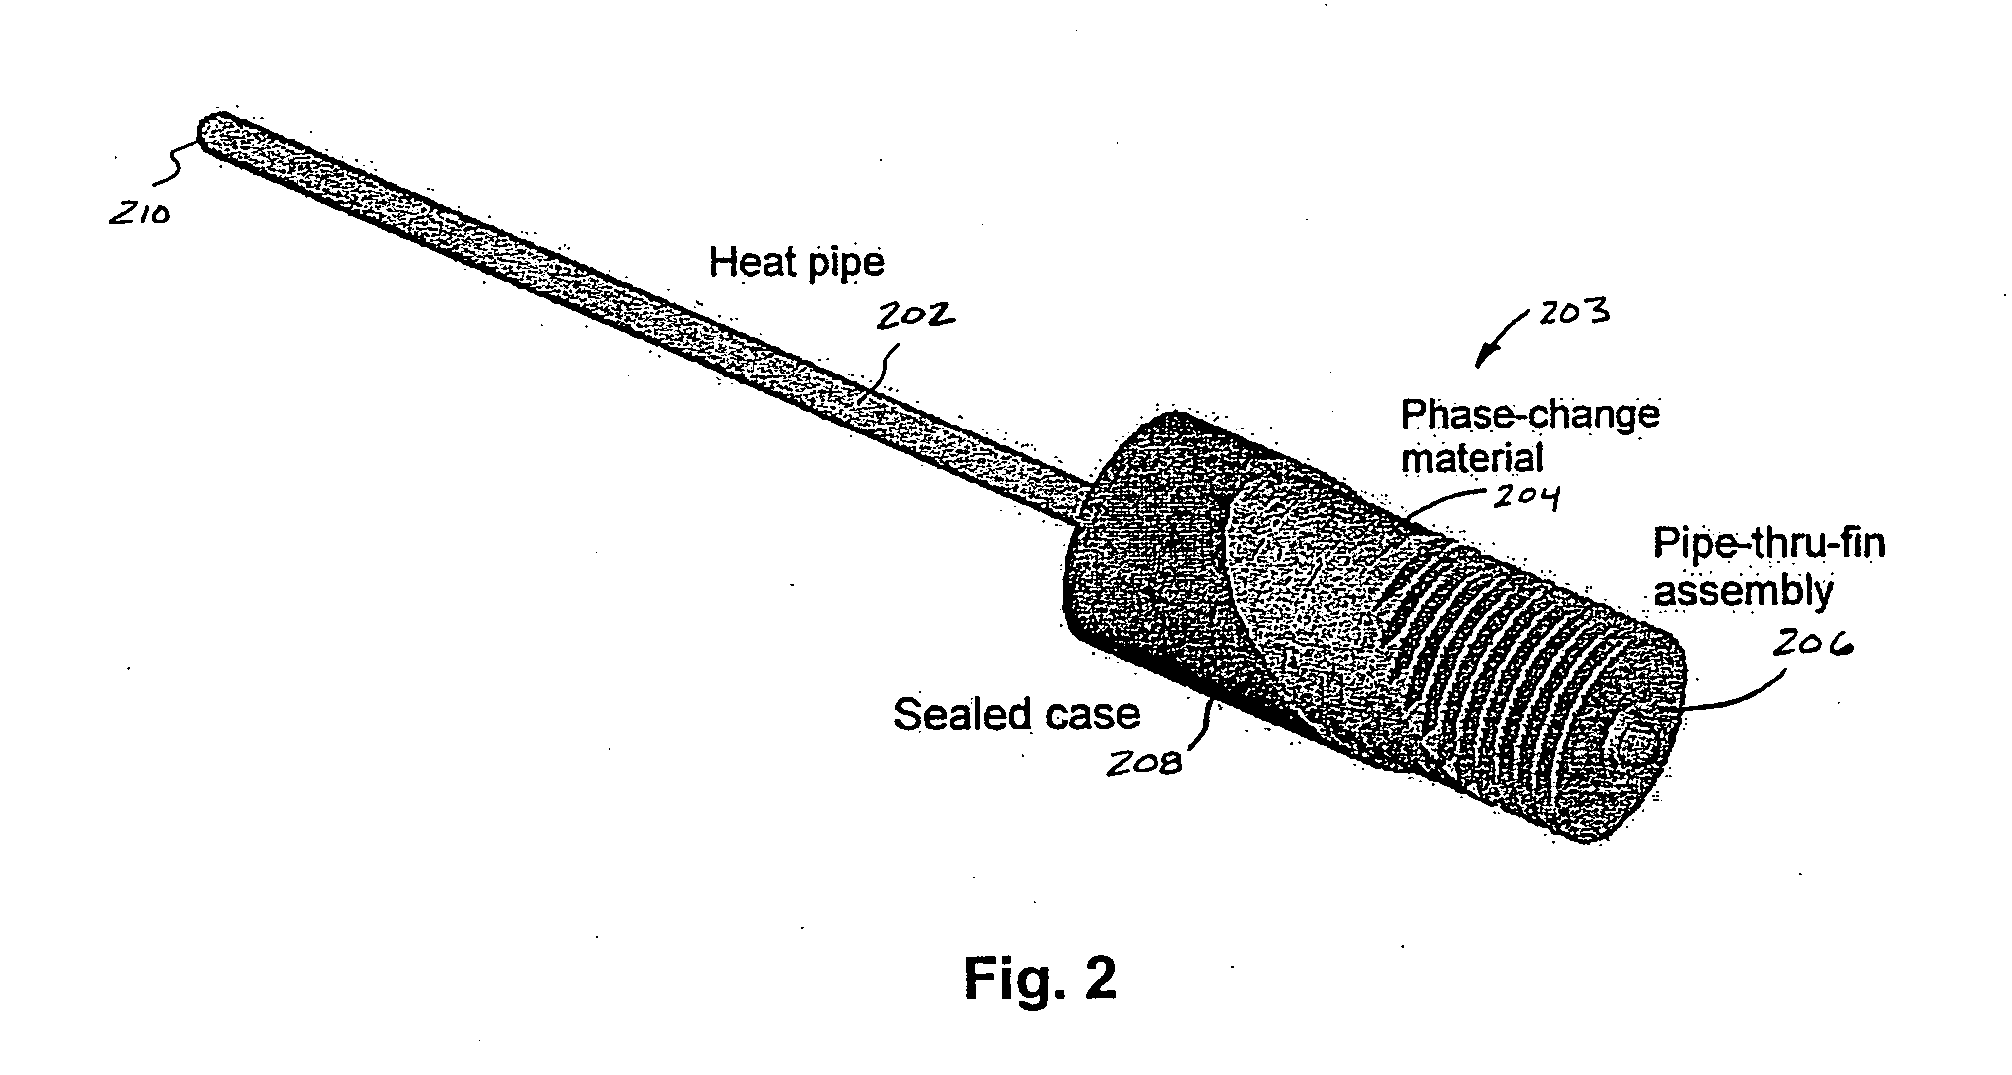 Phase-change heat reservoir device for transient thermal management